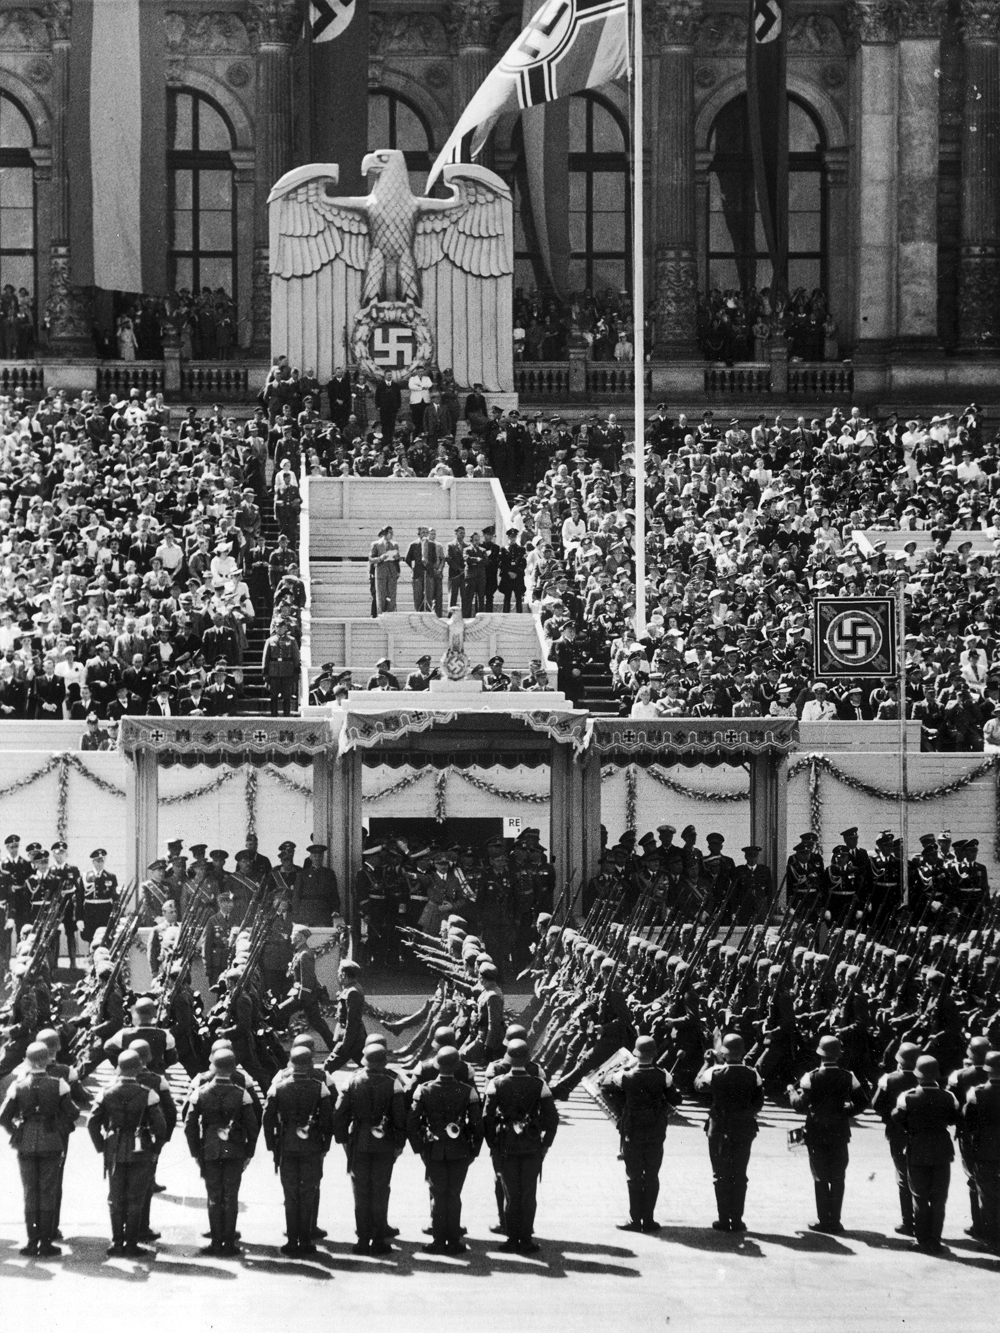 Parade of the Legion Condor in front of Berlin's Technische Hochschule in Charlottenburg, Adolf Hitler is in the tribune with officials and guests